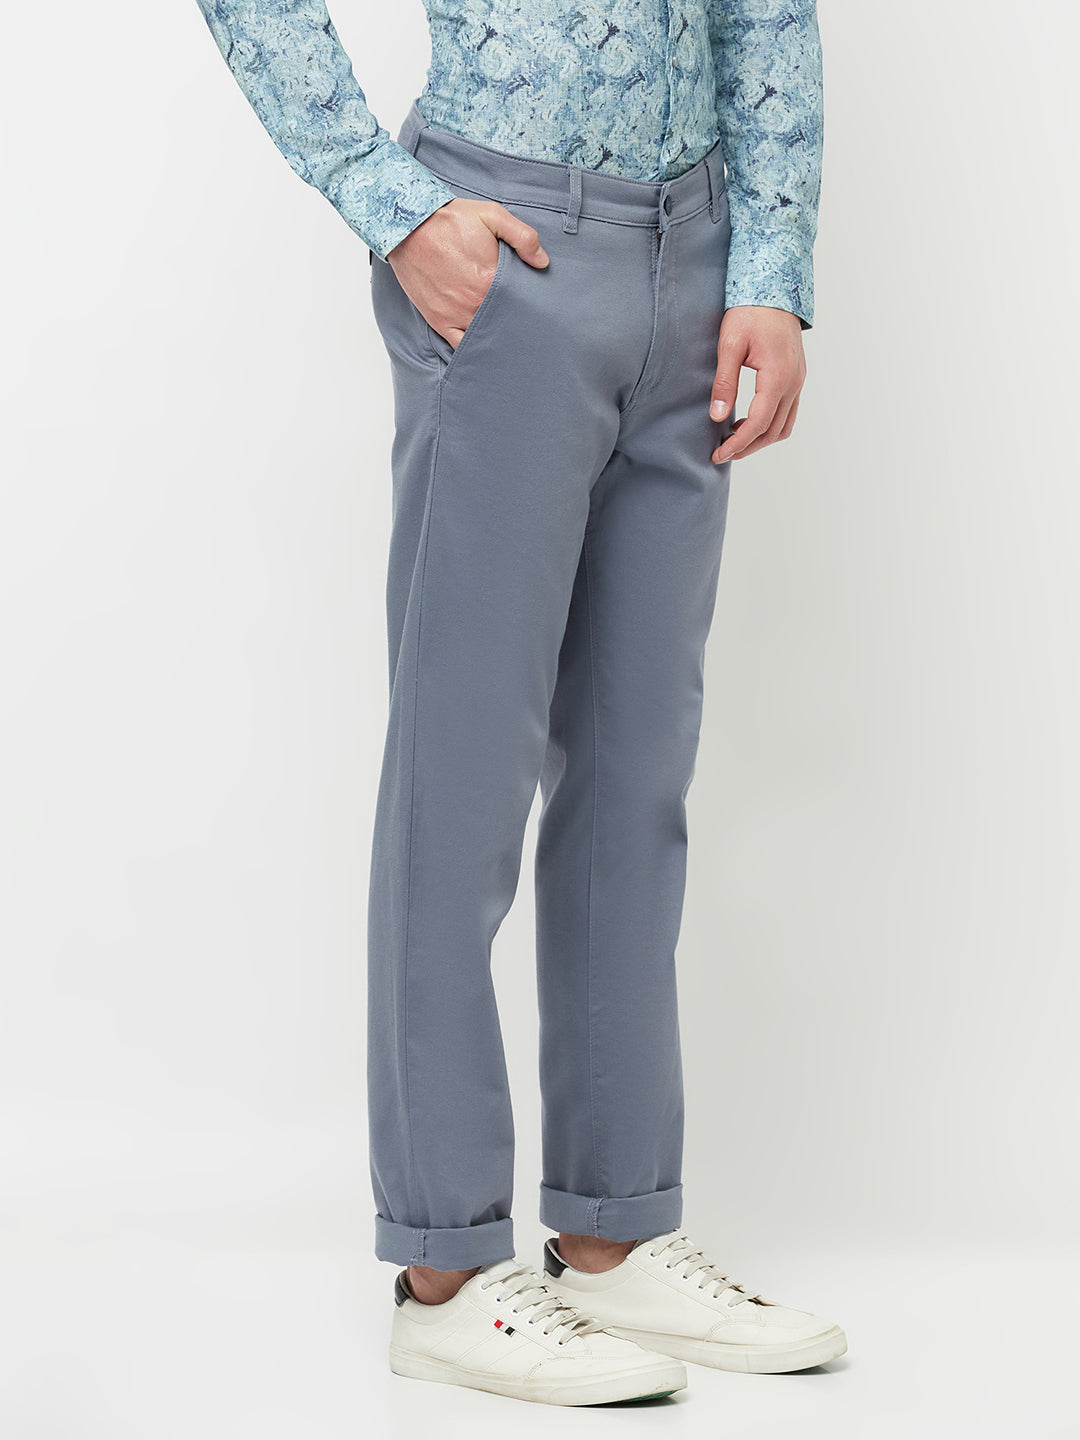 Blue Casual Trousers - Men Trousers